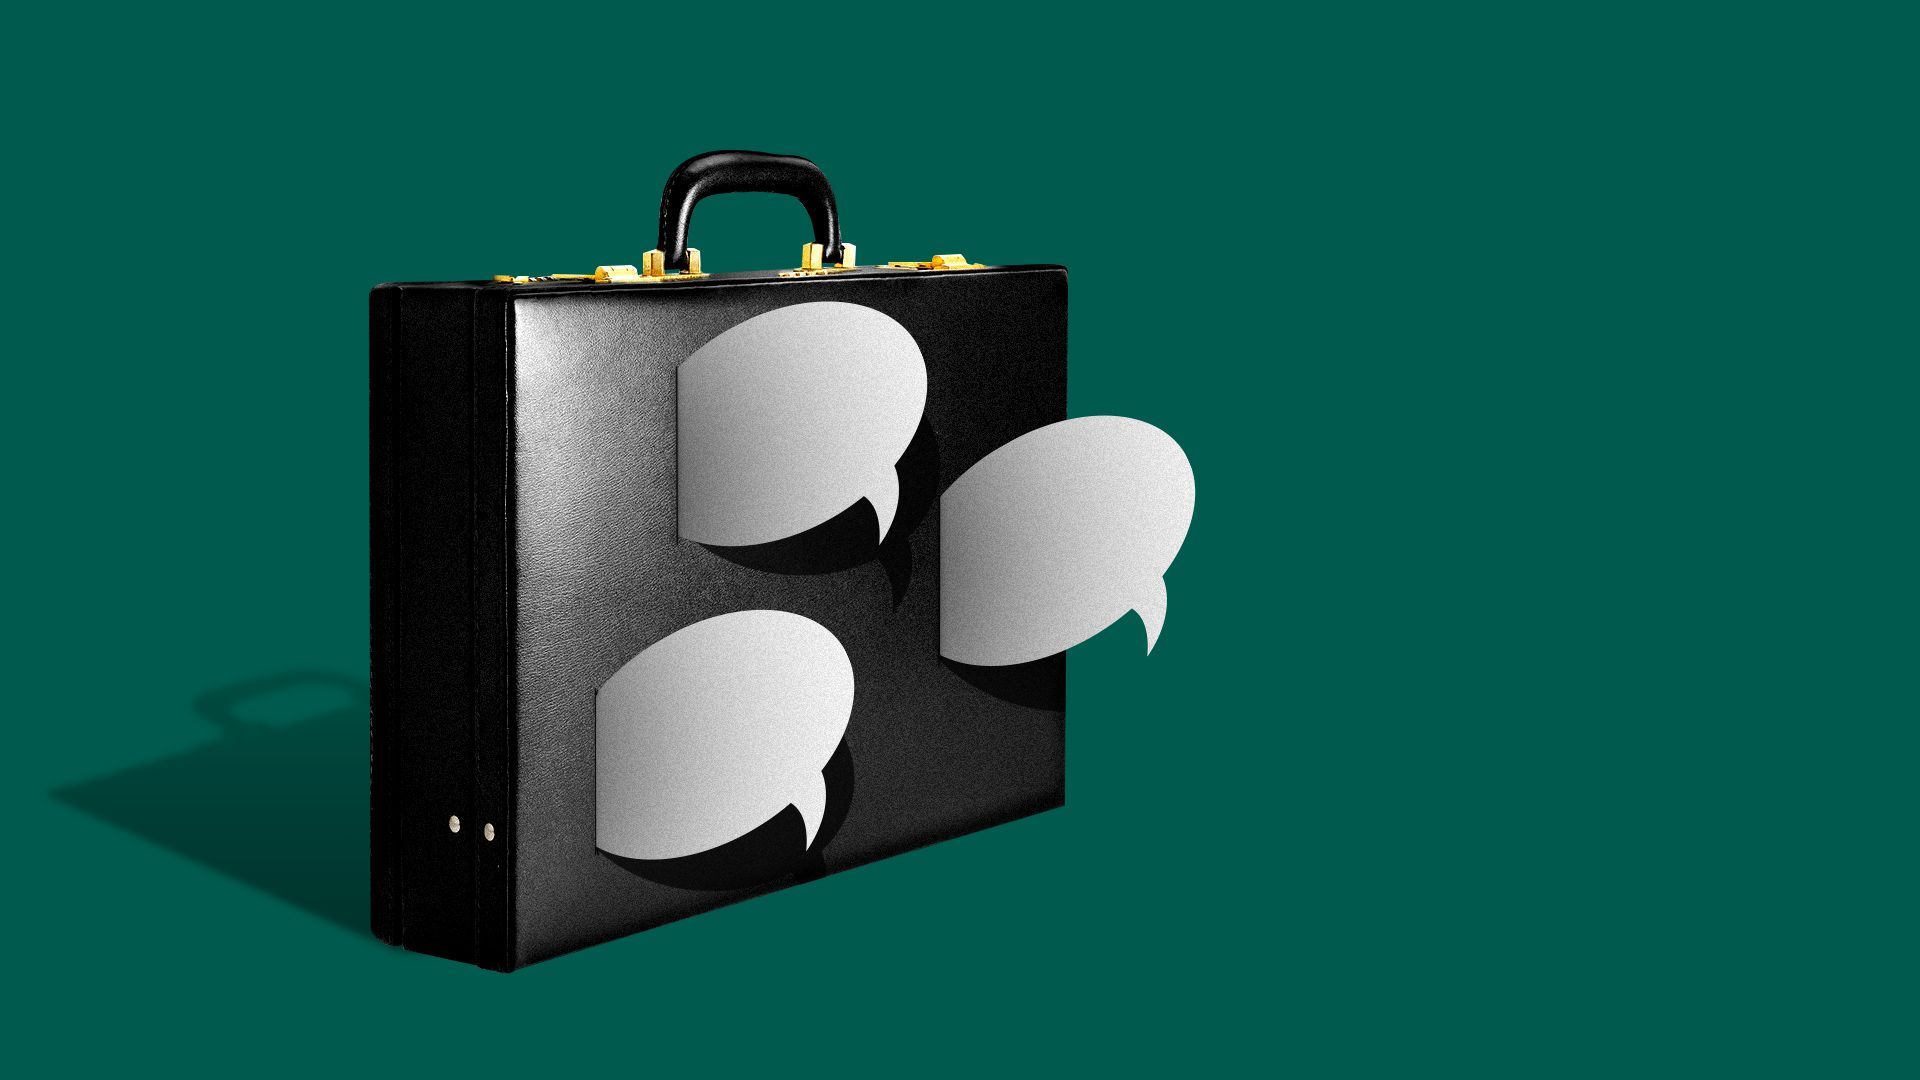 Illustration of a briefcase being pierced by several speech bubbles. 